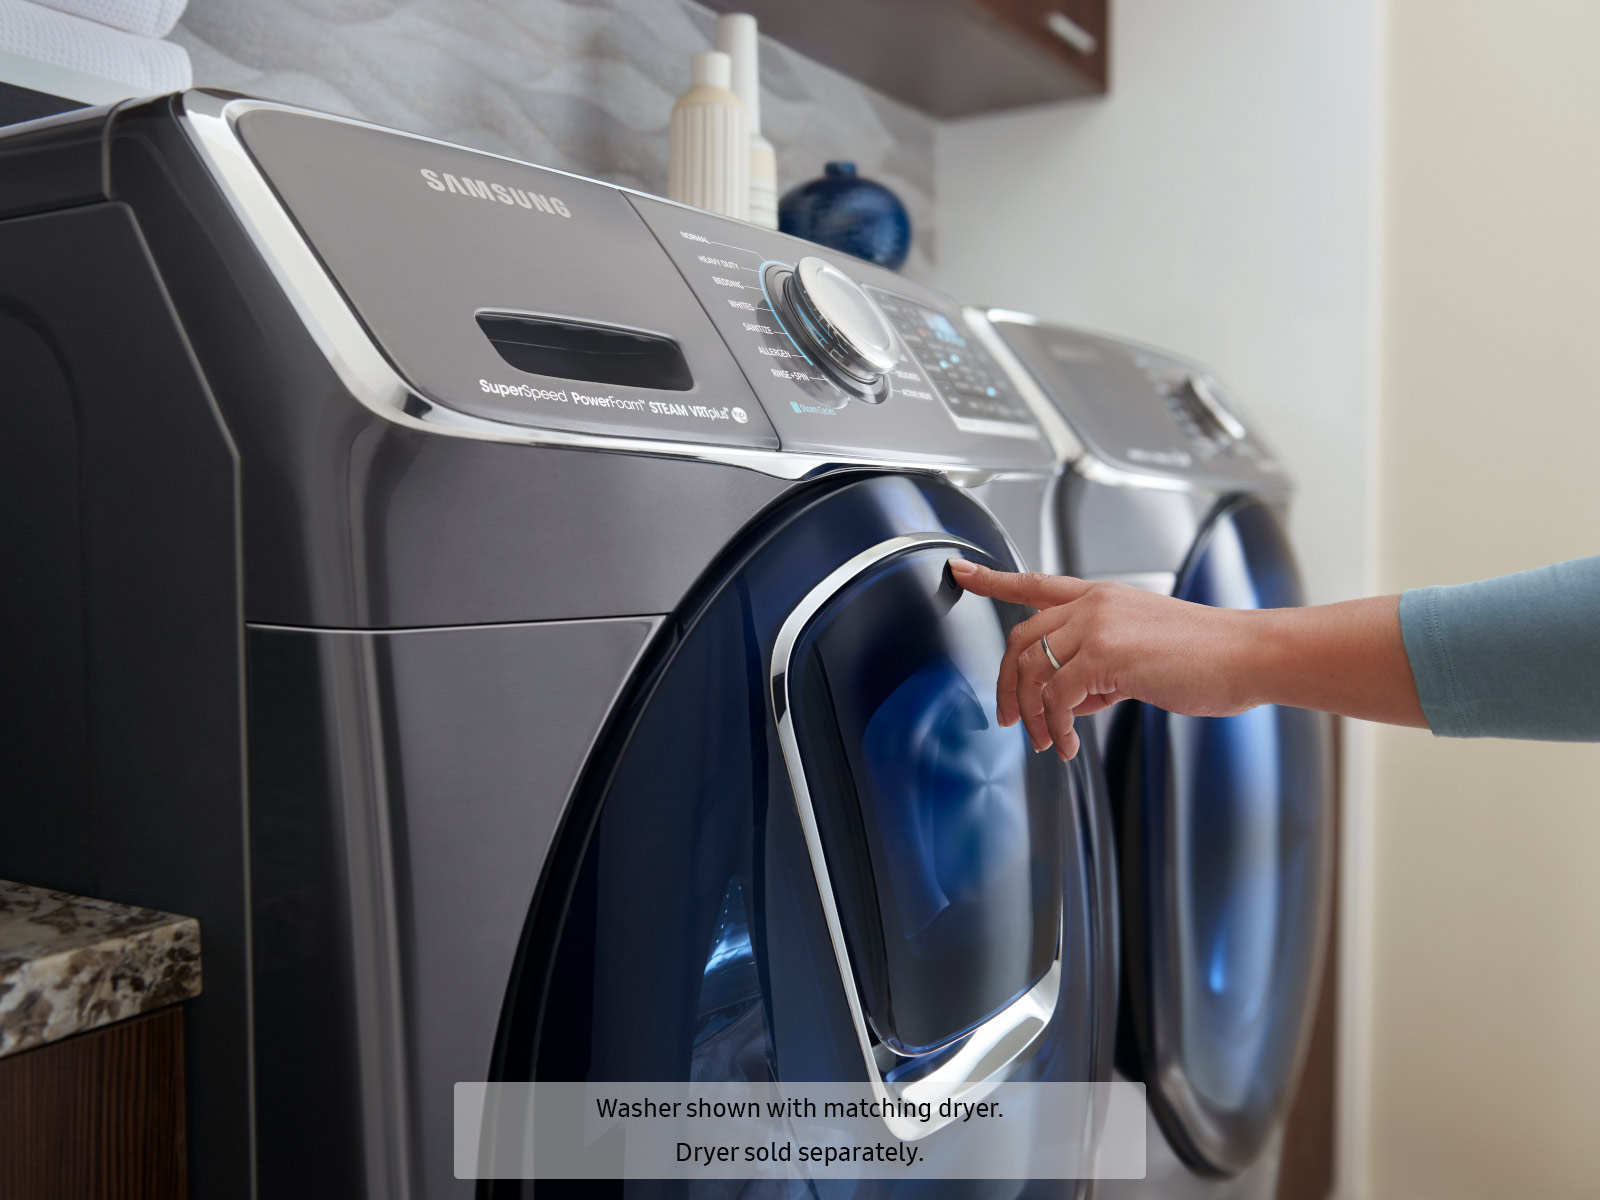 4.5 cu. ft. AddWash™ Front Load Washer in Black Stainless Steel